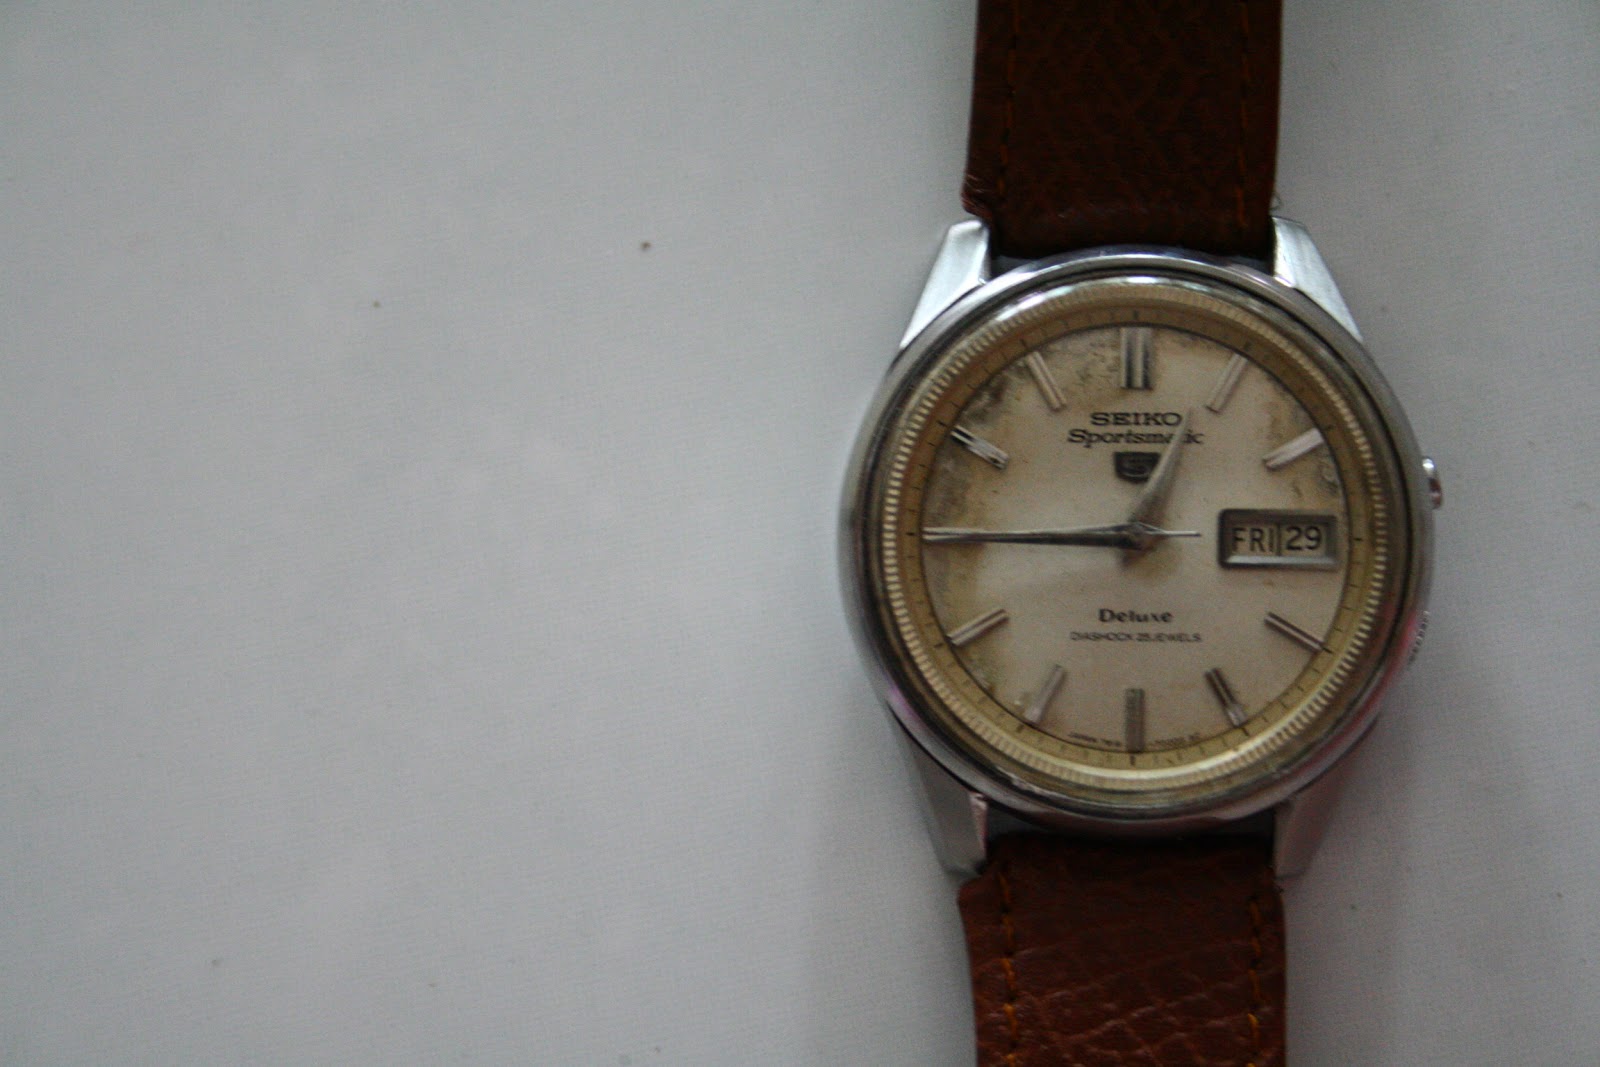 ONtimeINtime: (FOR SALE) Seiko sportsmatic 7619 - 7010